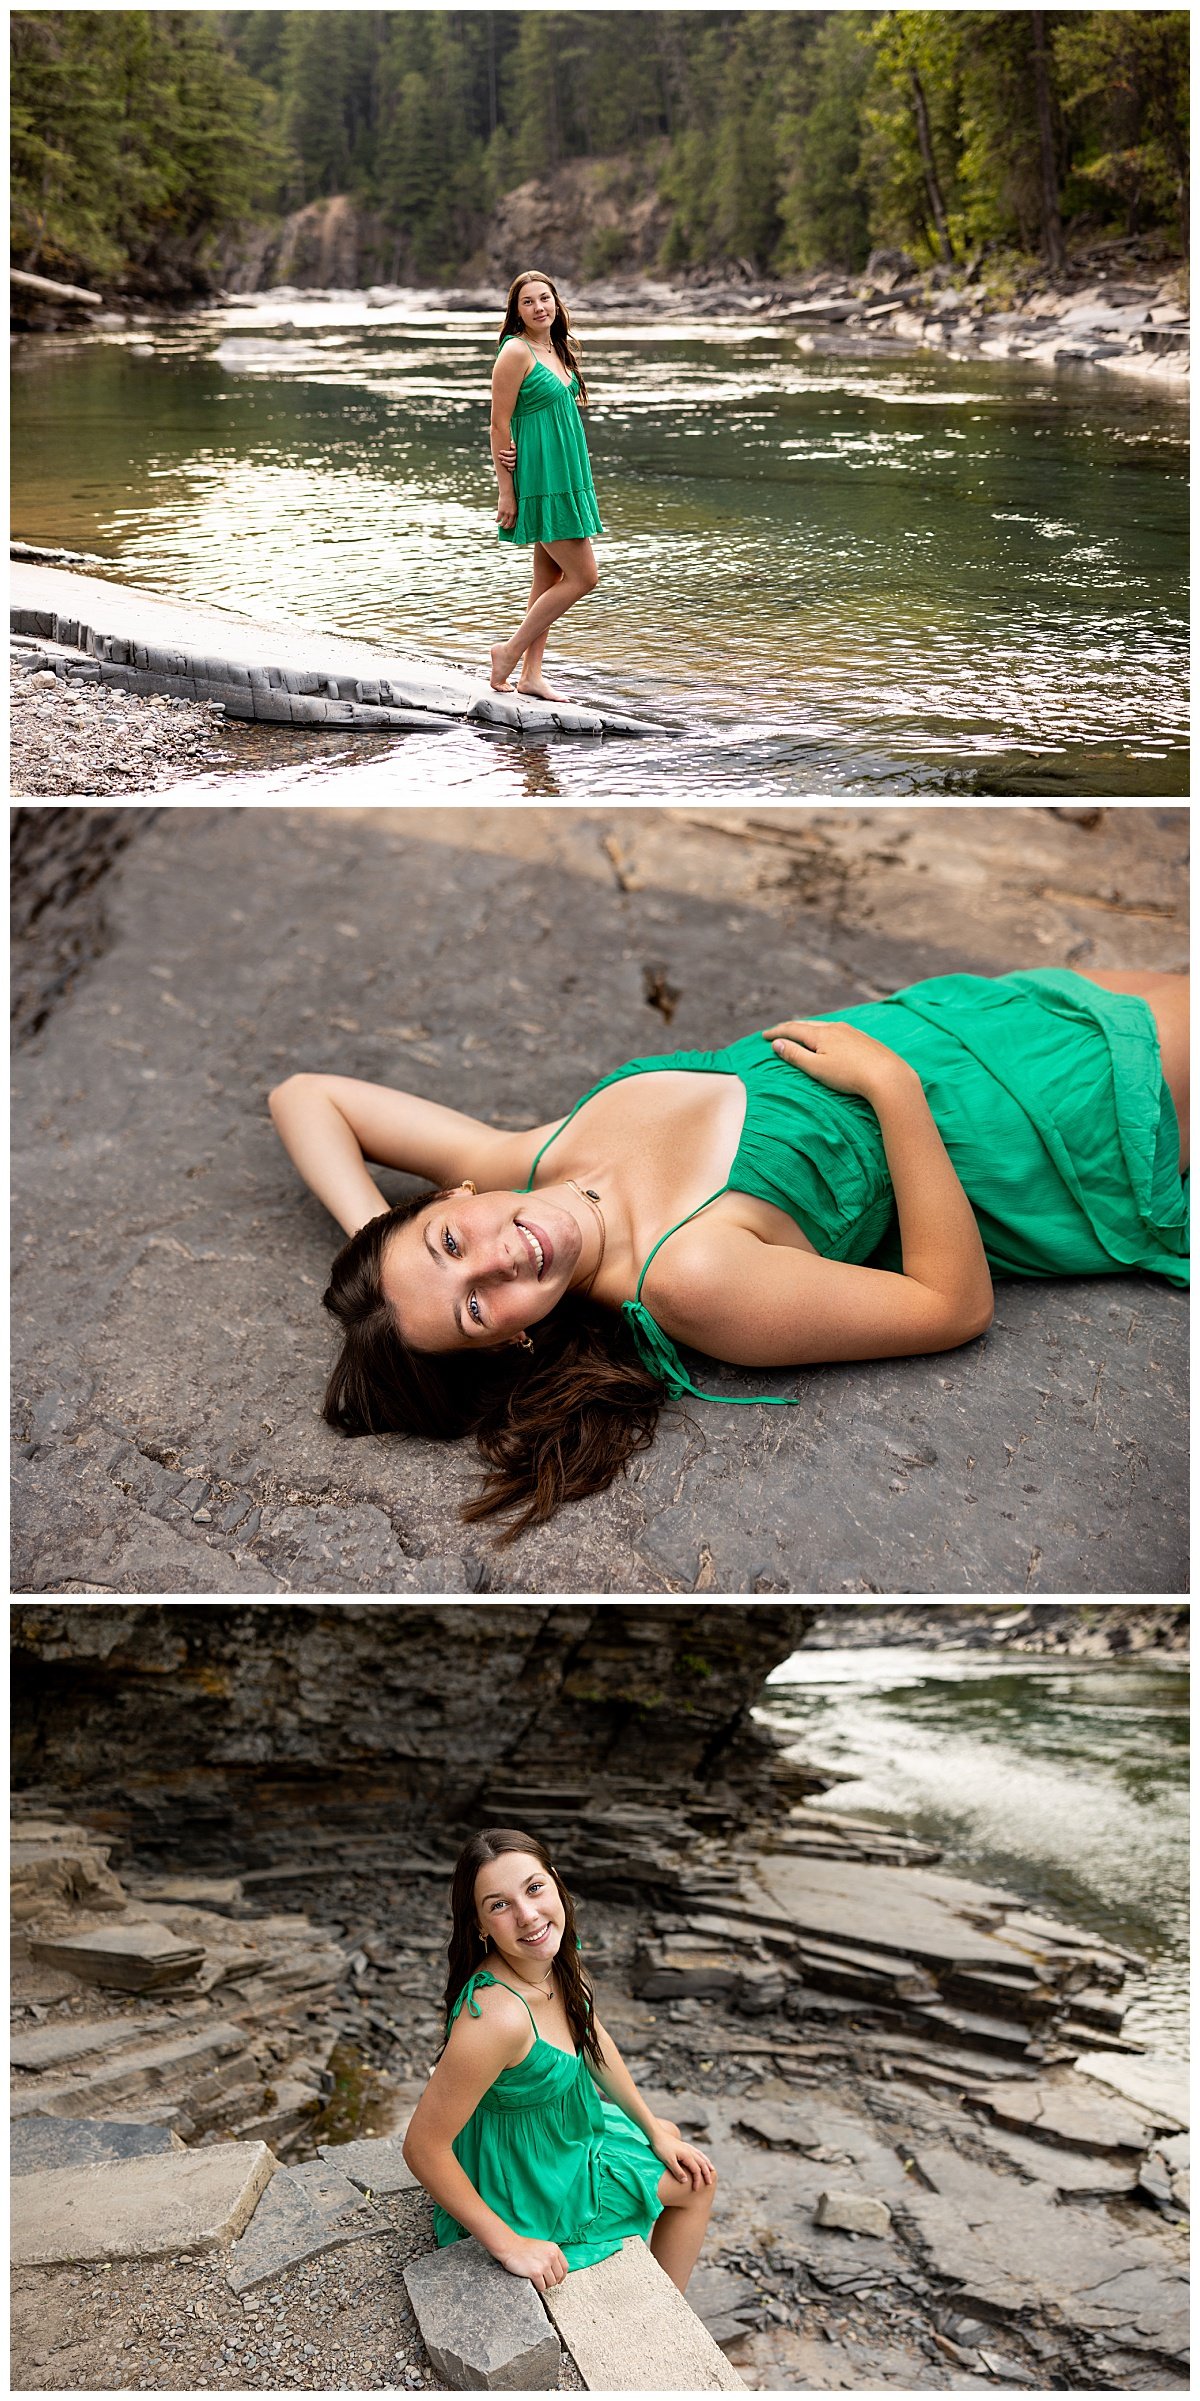 A collage depicts a brunette North Dakota high school senior barefoot & wearing a green knee length dress while strolling next to a river surrounded by forest in Glacier National Park.